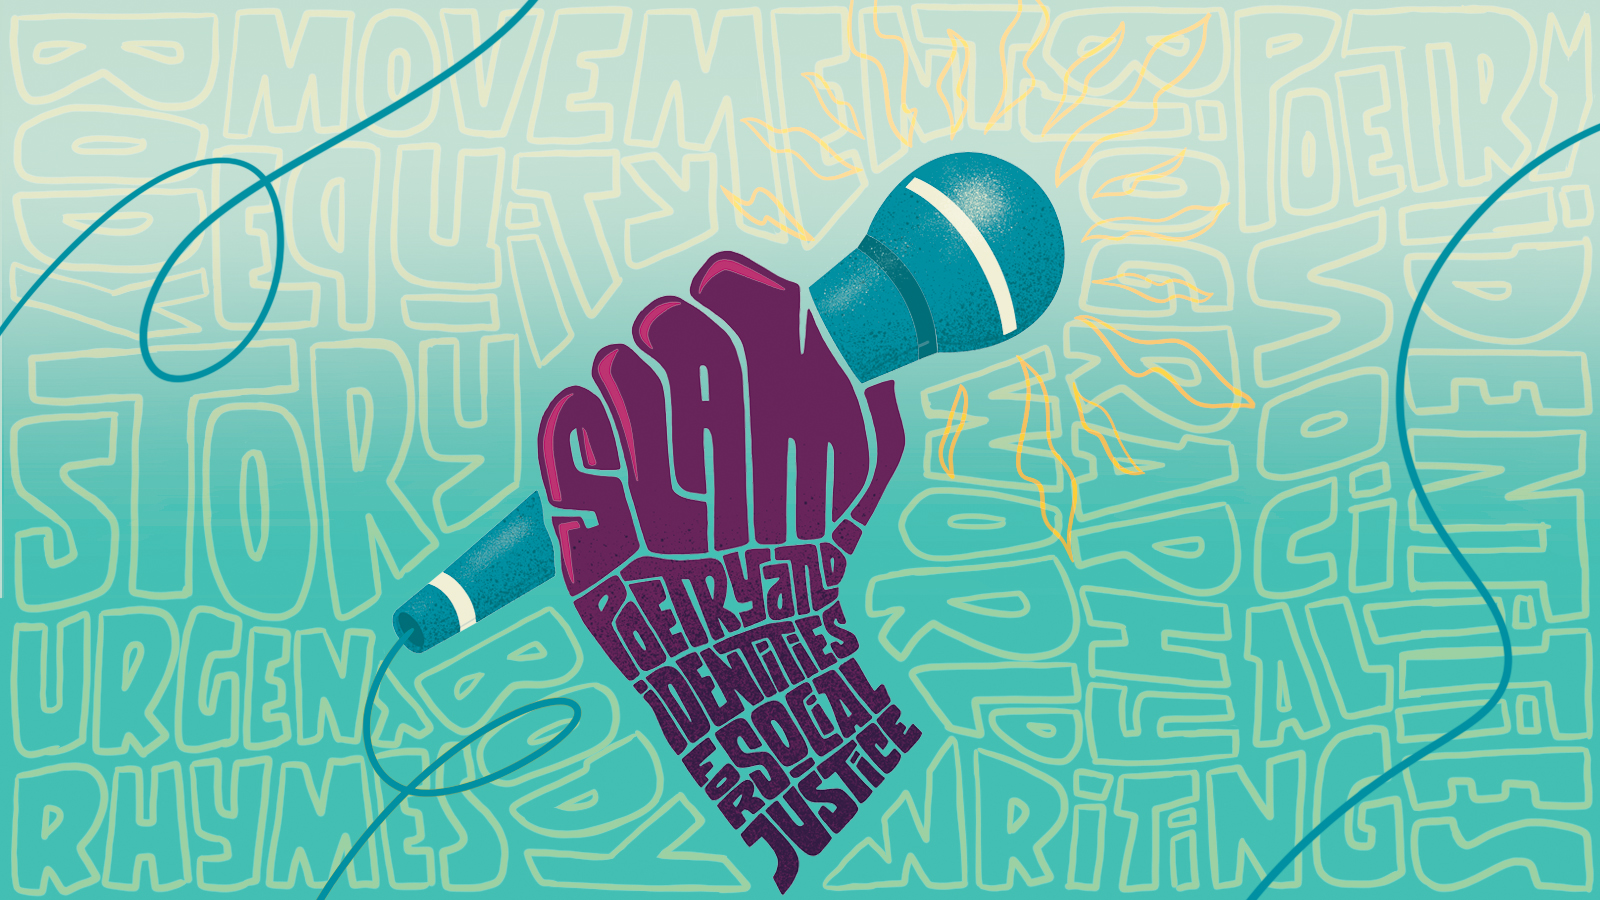 SLAM! Poetry and Identities for Social Justice